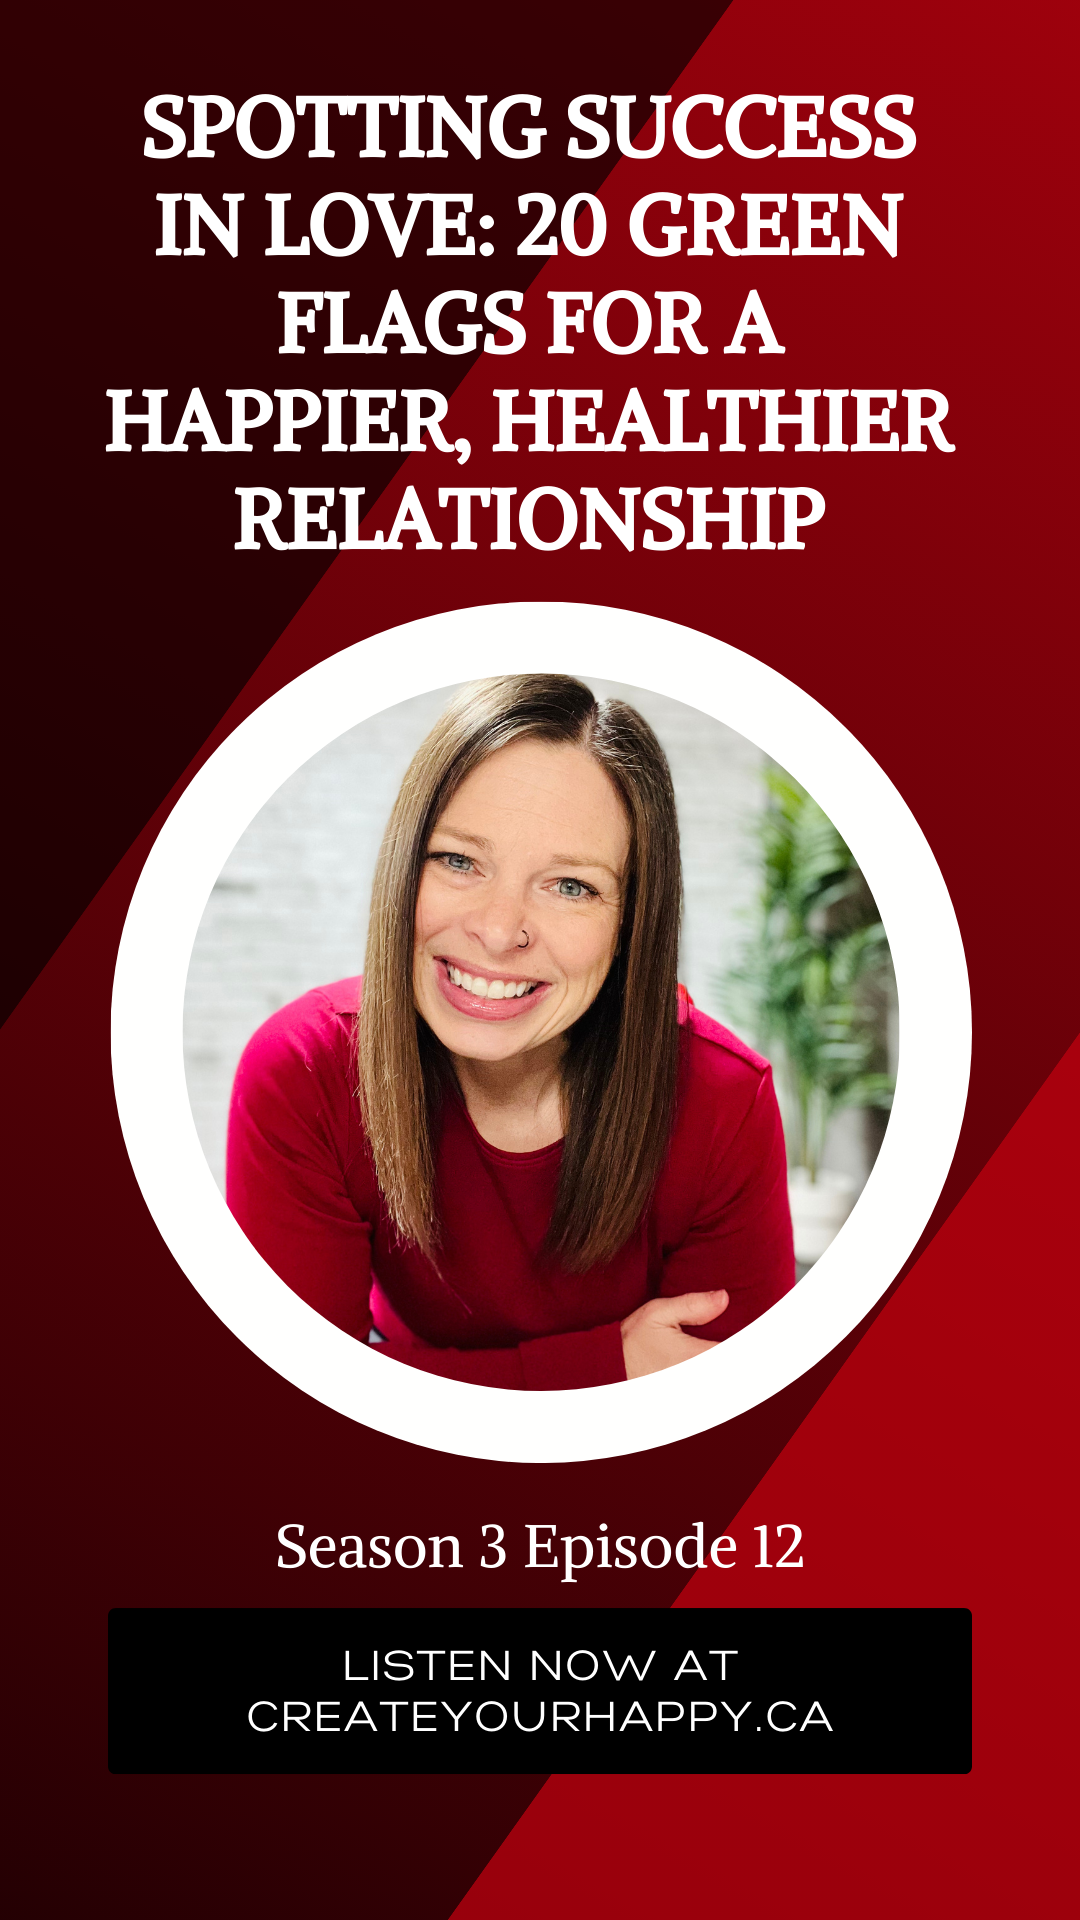 S3E12 | Spotting Success in Love: 20 Green Flags for a Happier, Healthier Relationship